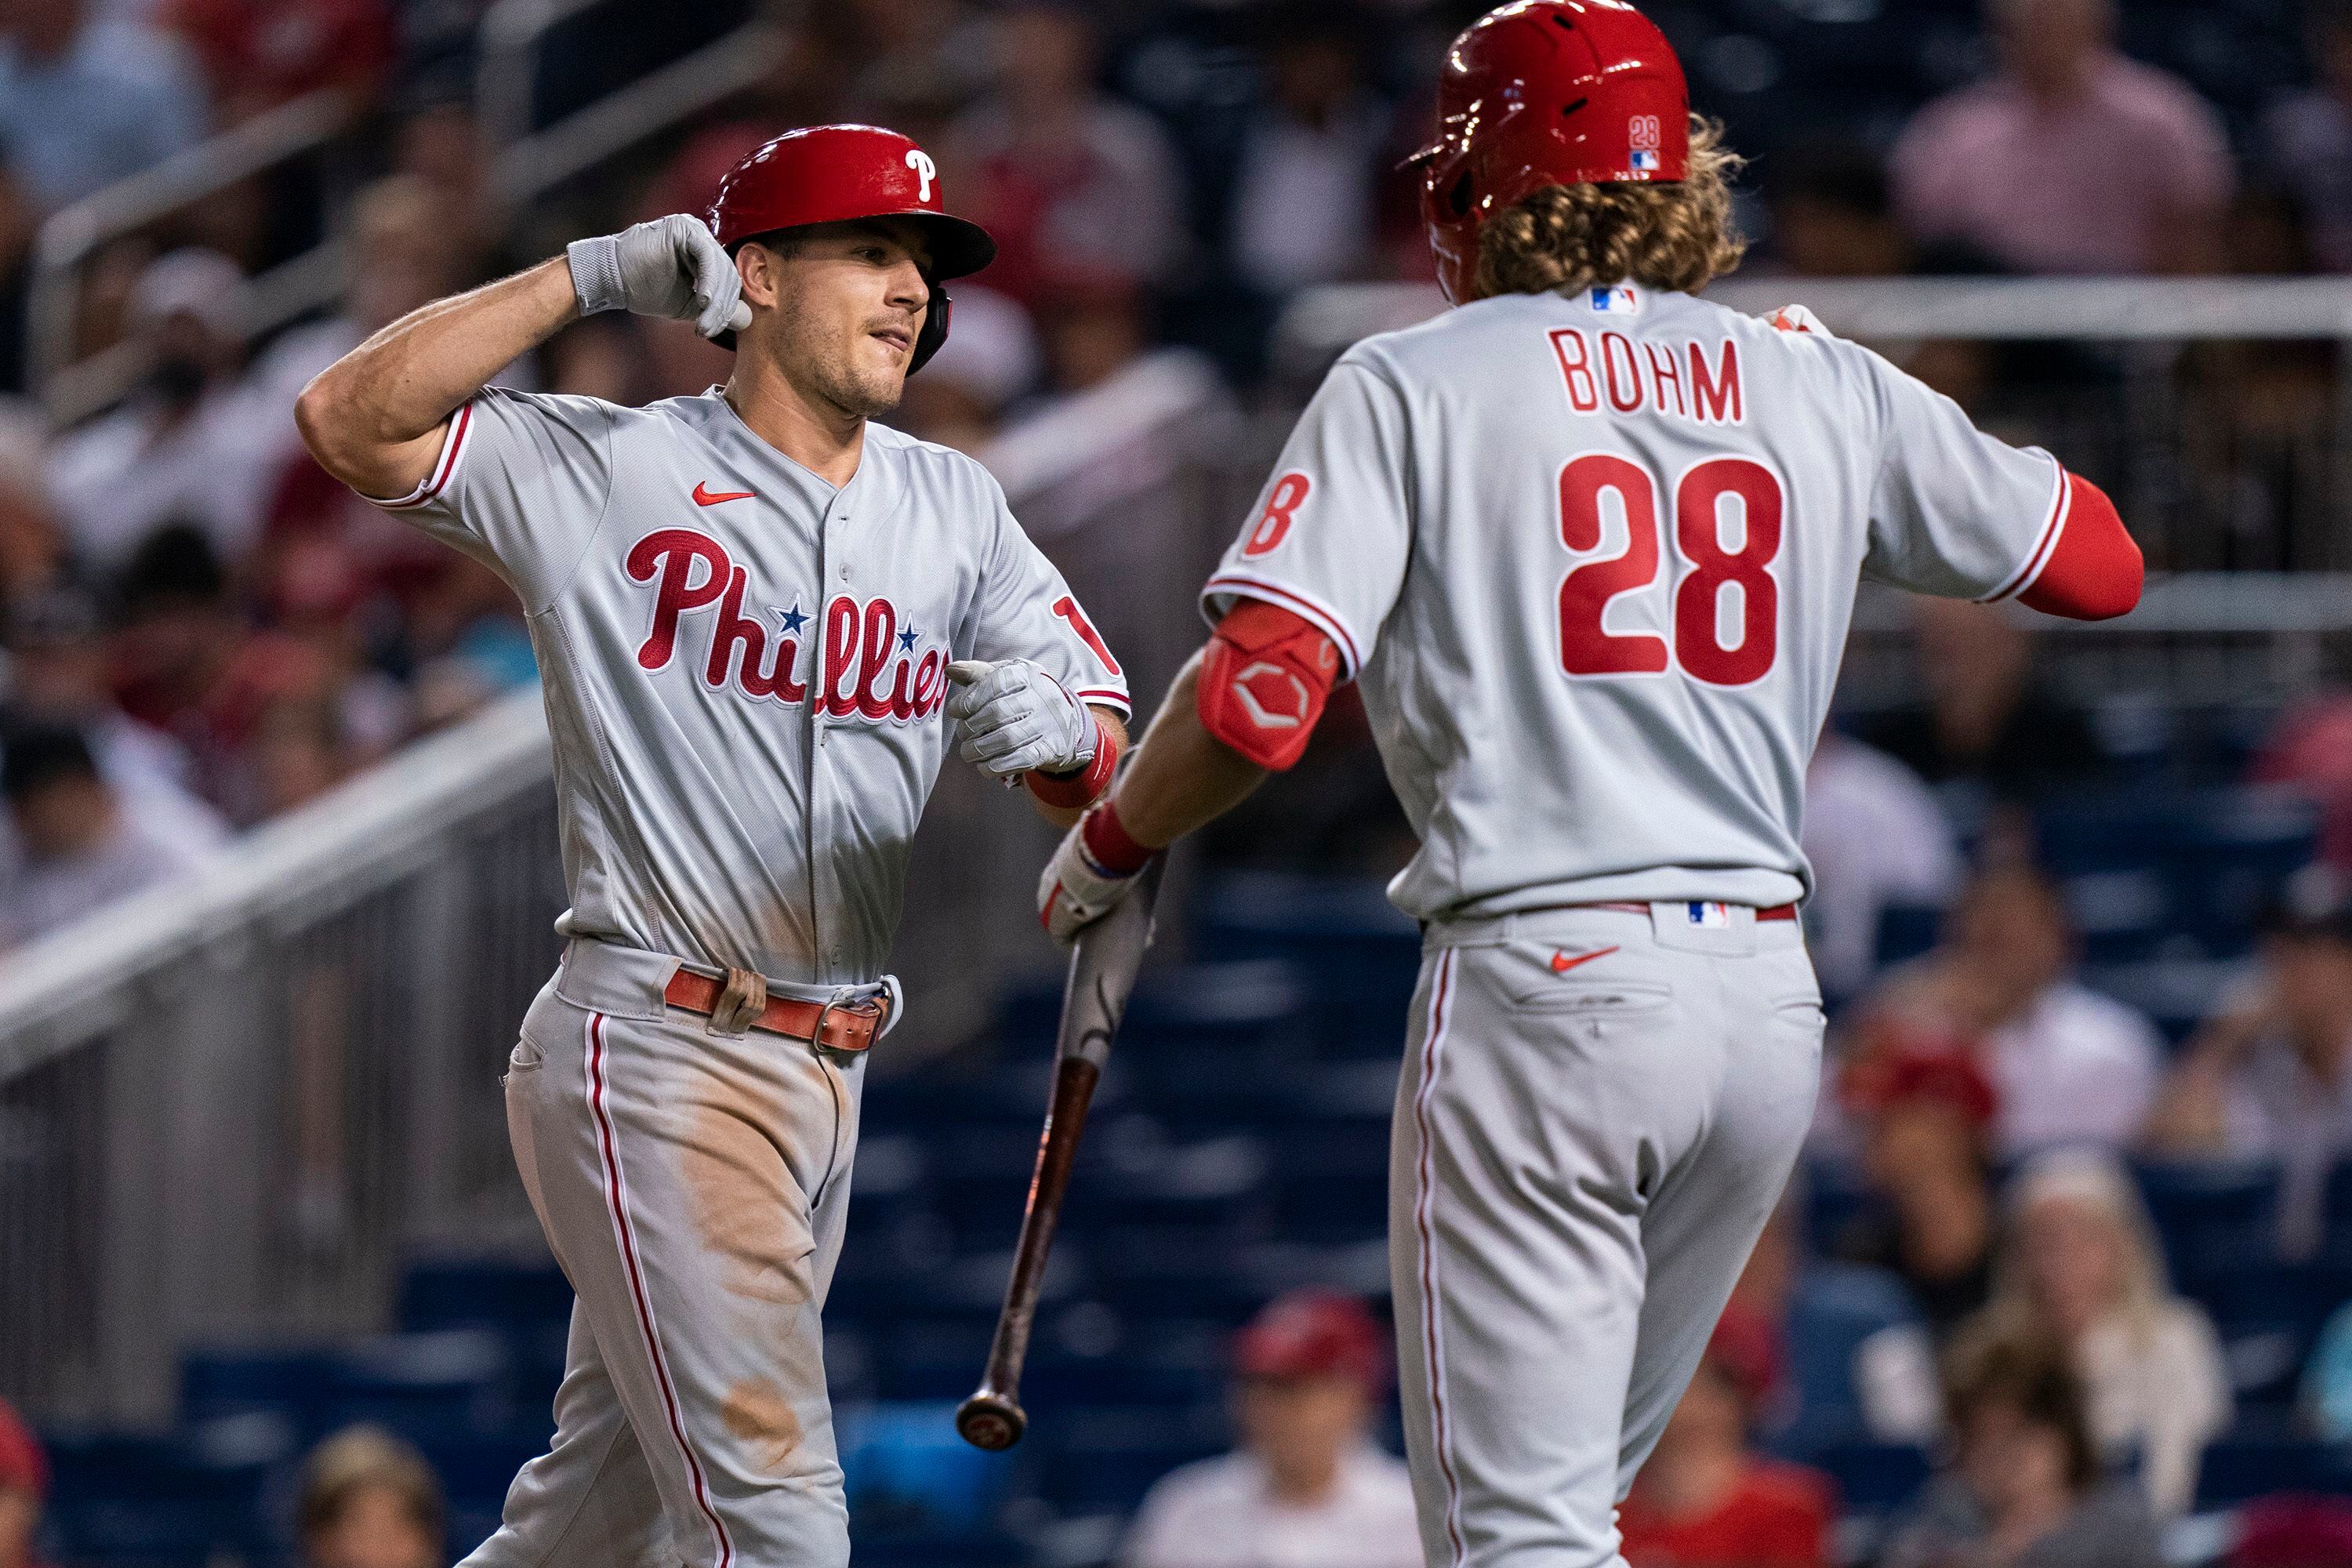 Phillies catcher Realmuto back from COVID-19 IL after 1 day – Daily Freeman